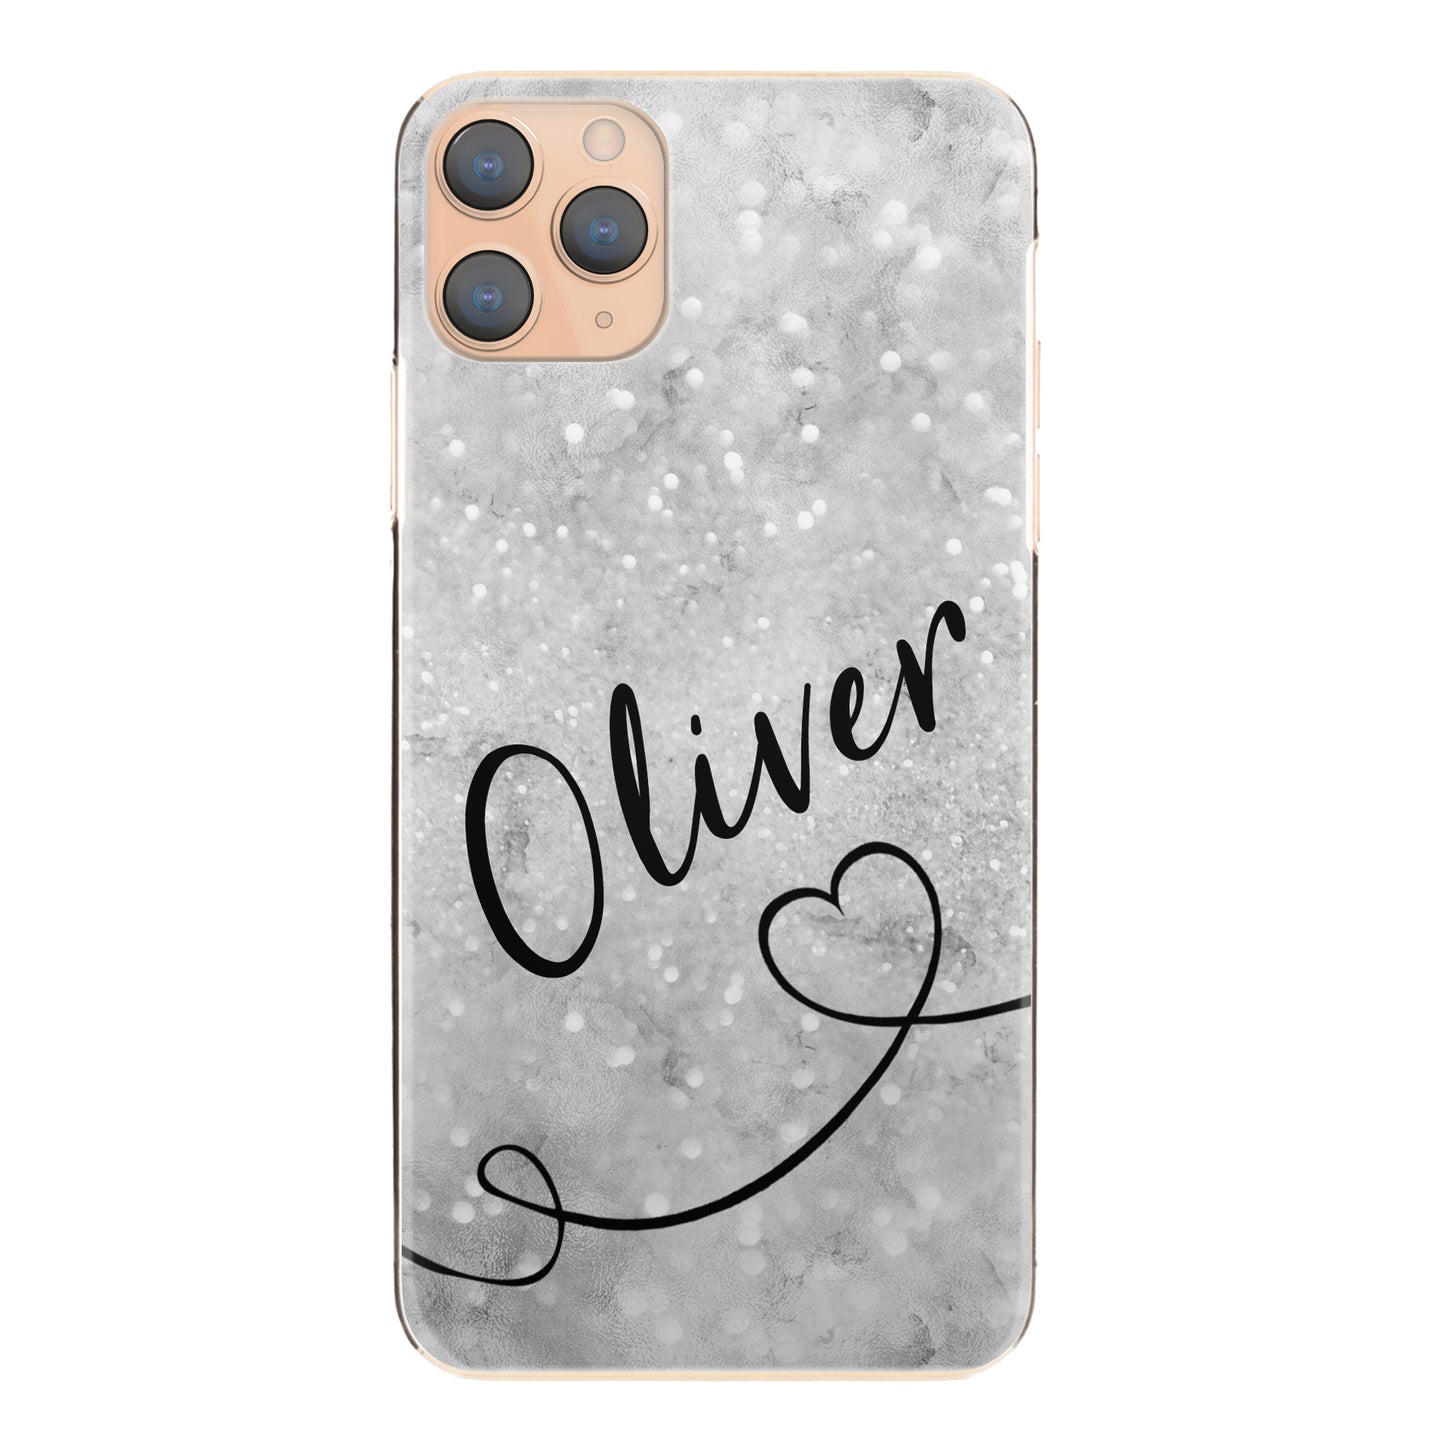 Personalised Apple iPhone Hard Case with Stylish Text and Heart Line on Textured Grey